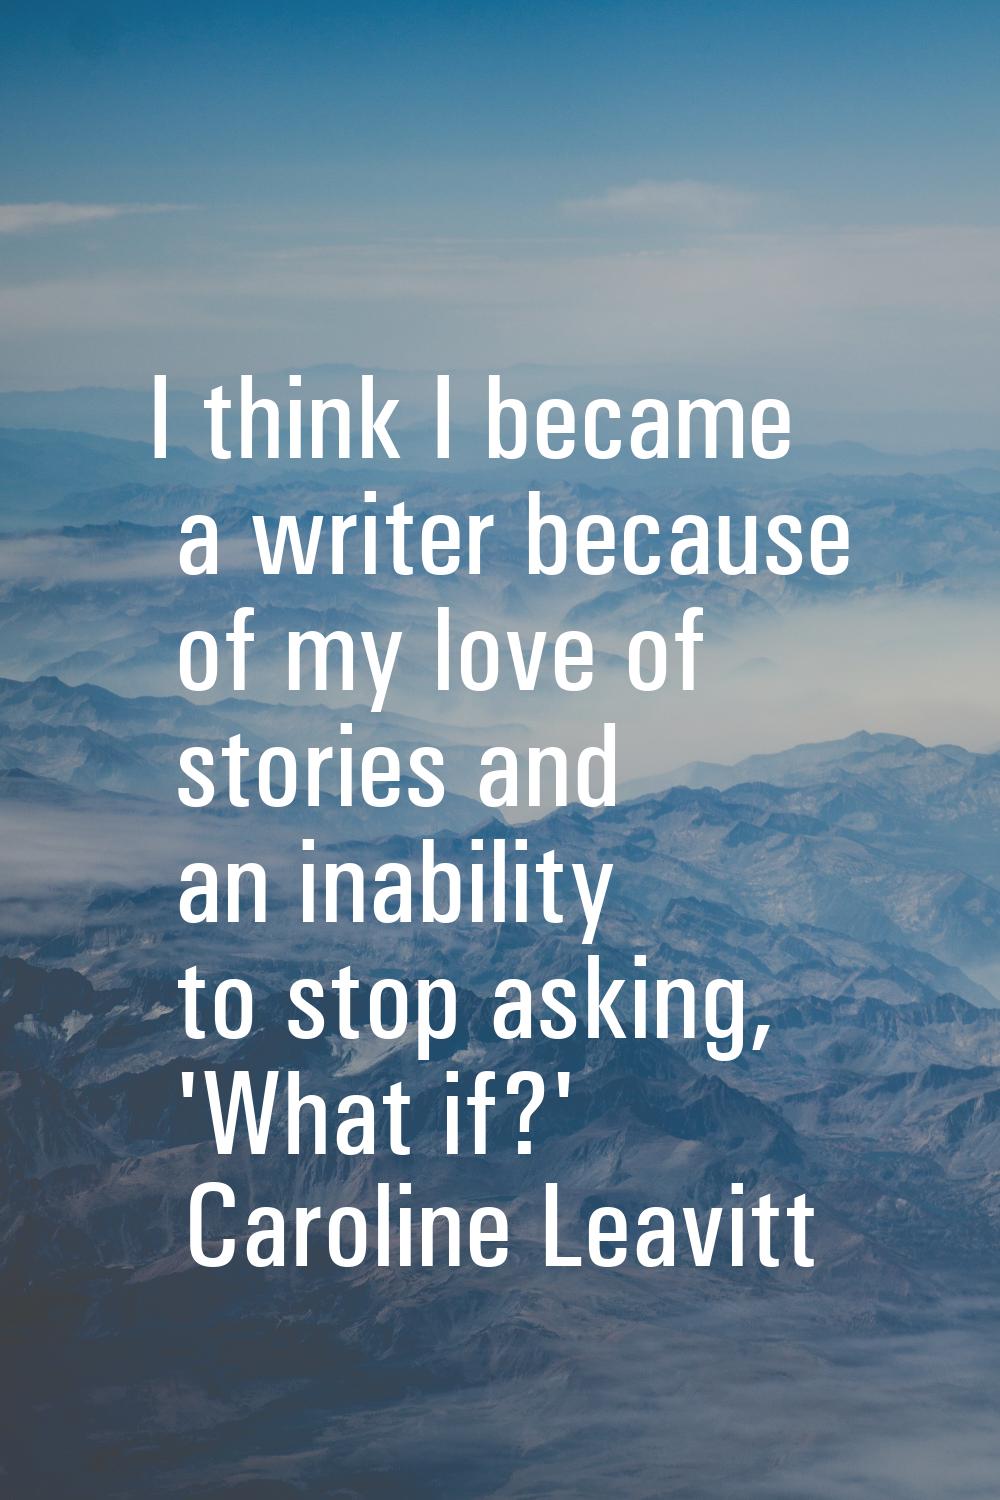 I think I became a writer because of my love of stories and an inability to stop asking, 'What if?'